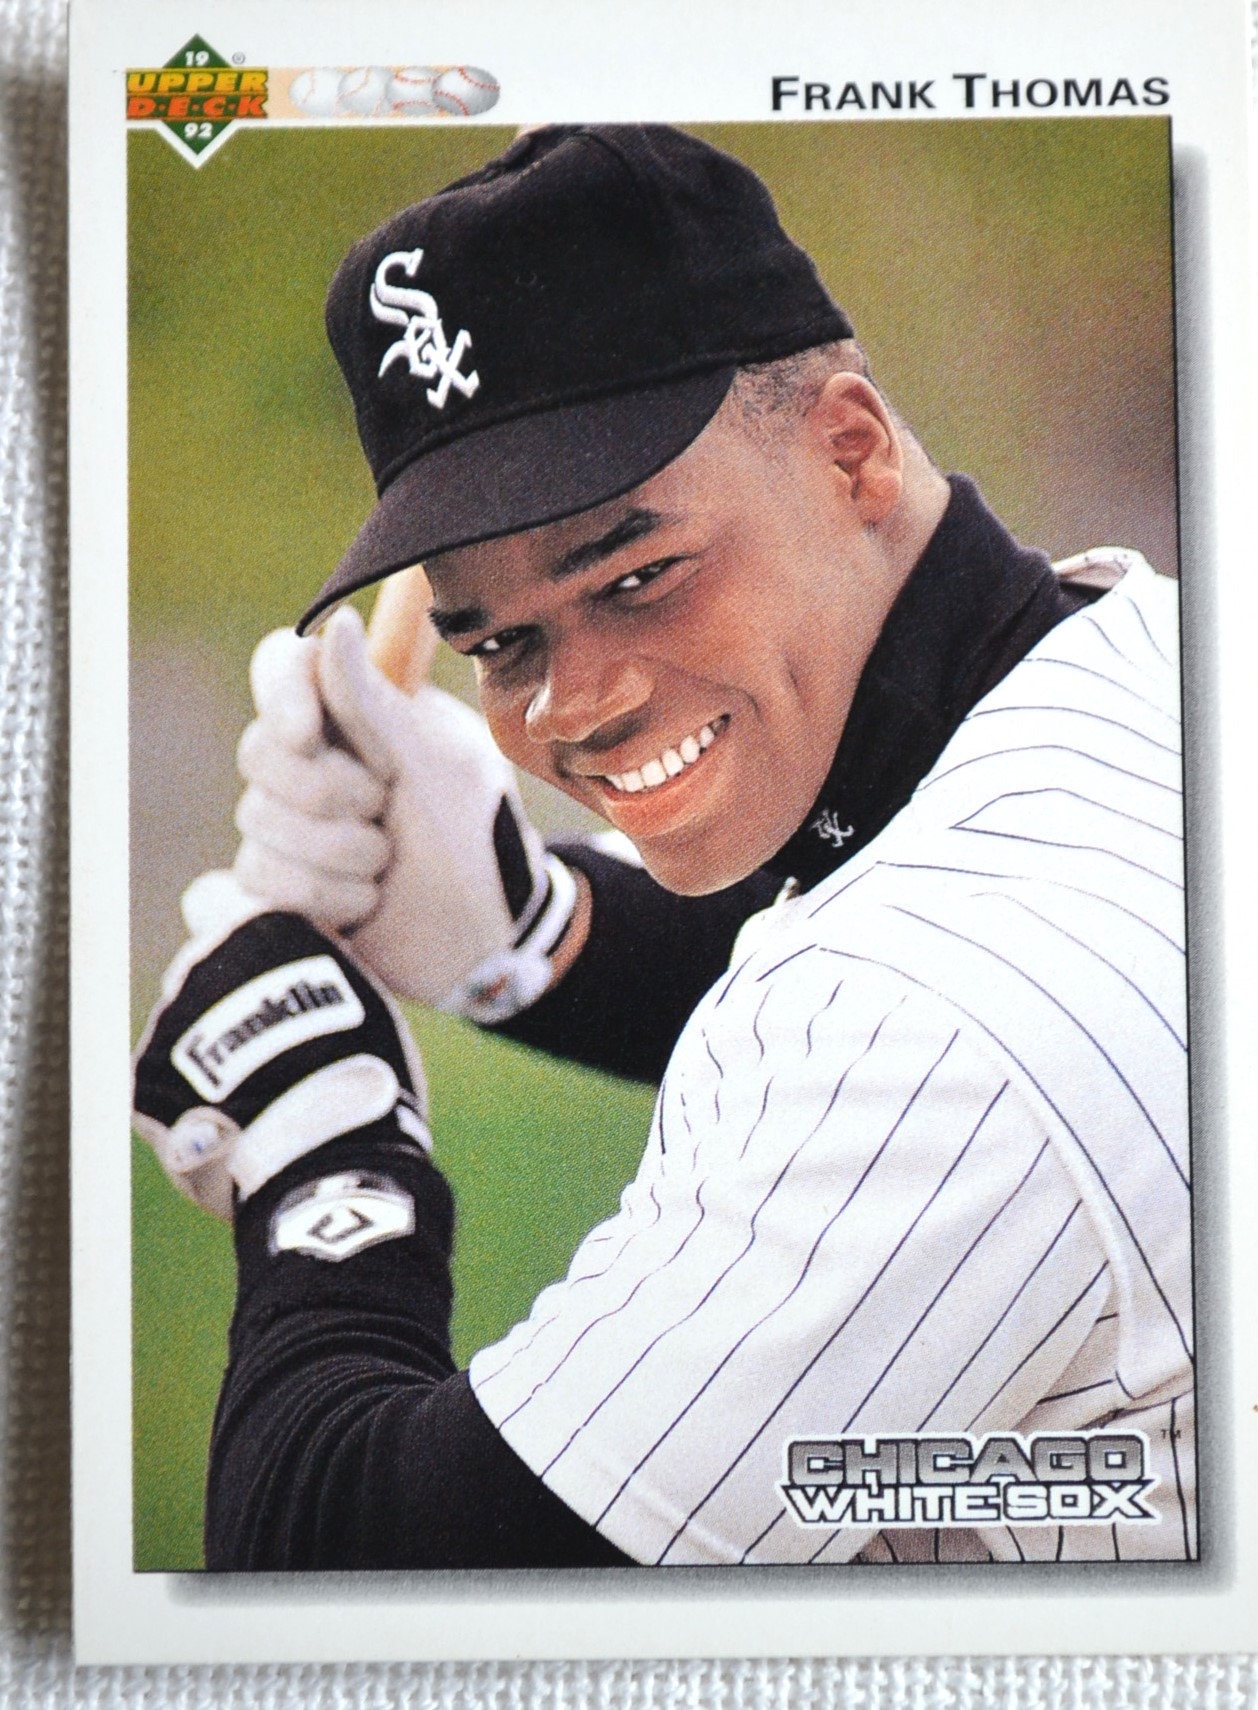 Buy Frank Thomas Baseball Card 1992 Upper Deck No 166 White Sox Online in  India 